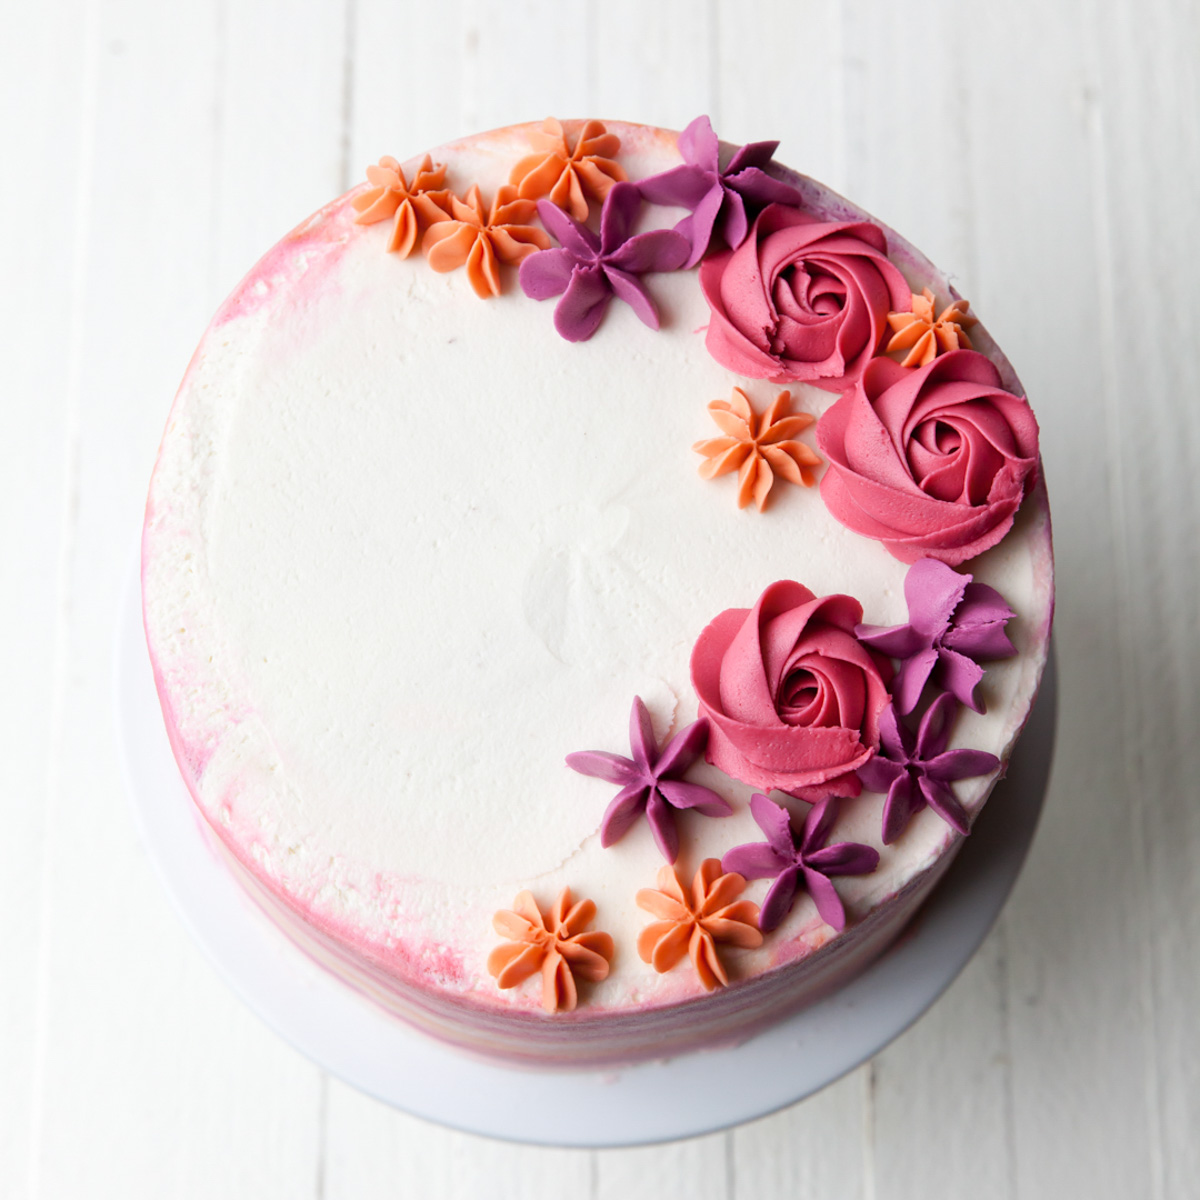 How to Pipe a Two-Toned Frosting Rose - Sally's Baking Addiction